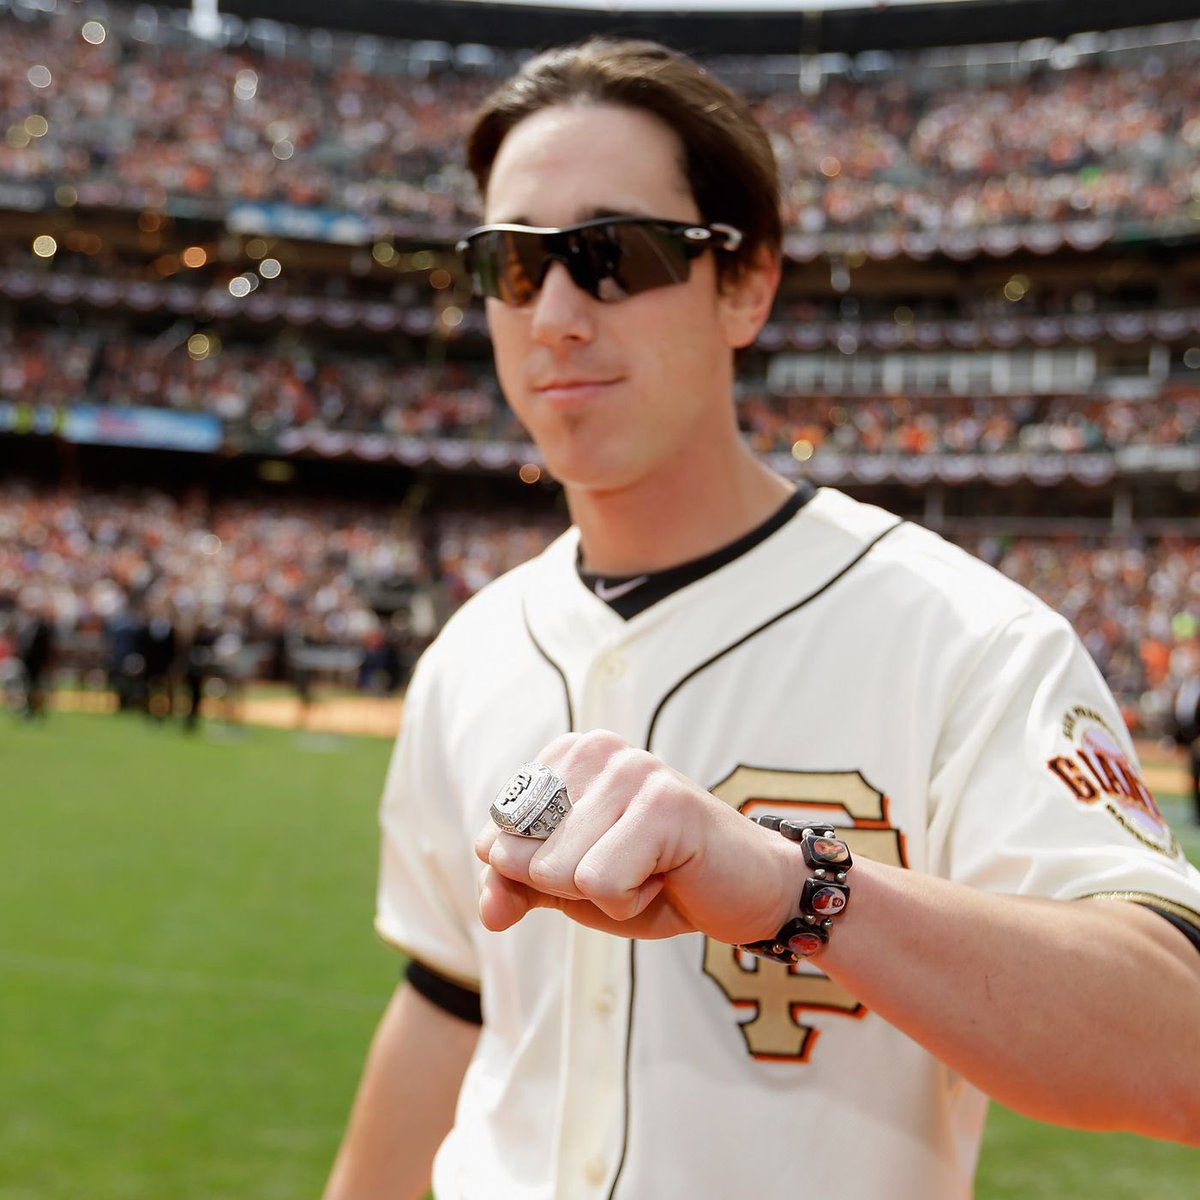 This tweet is to remind you how great Tim Lincecum was: 

10 year MLB career
110-89
3.74 ERA
1,736 Ks
4X All Star
3X World Series Champion
2X NL Cy Young
3X NL Strikeout Leader
Pitched two no-hitters